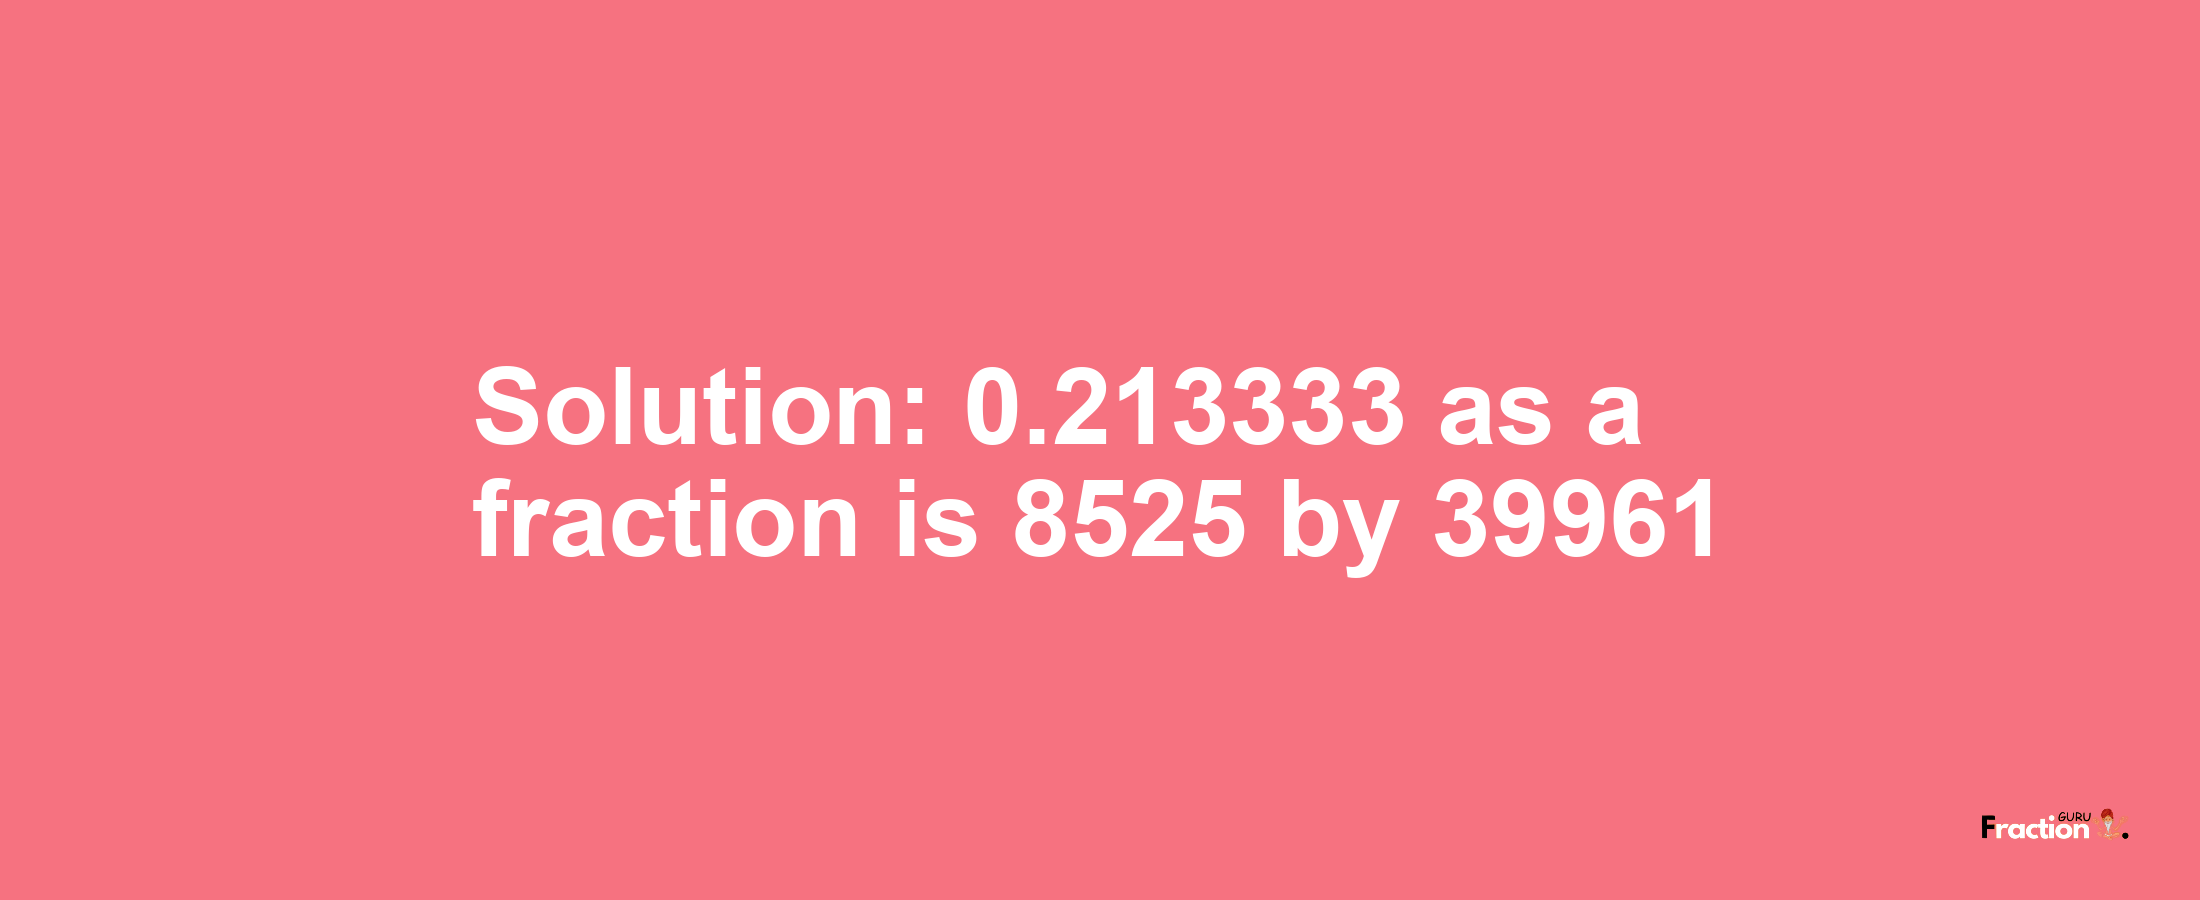 Solution:0.213333 as a fraction is 8525/39961